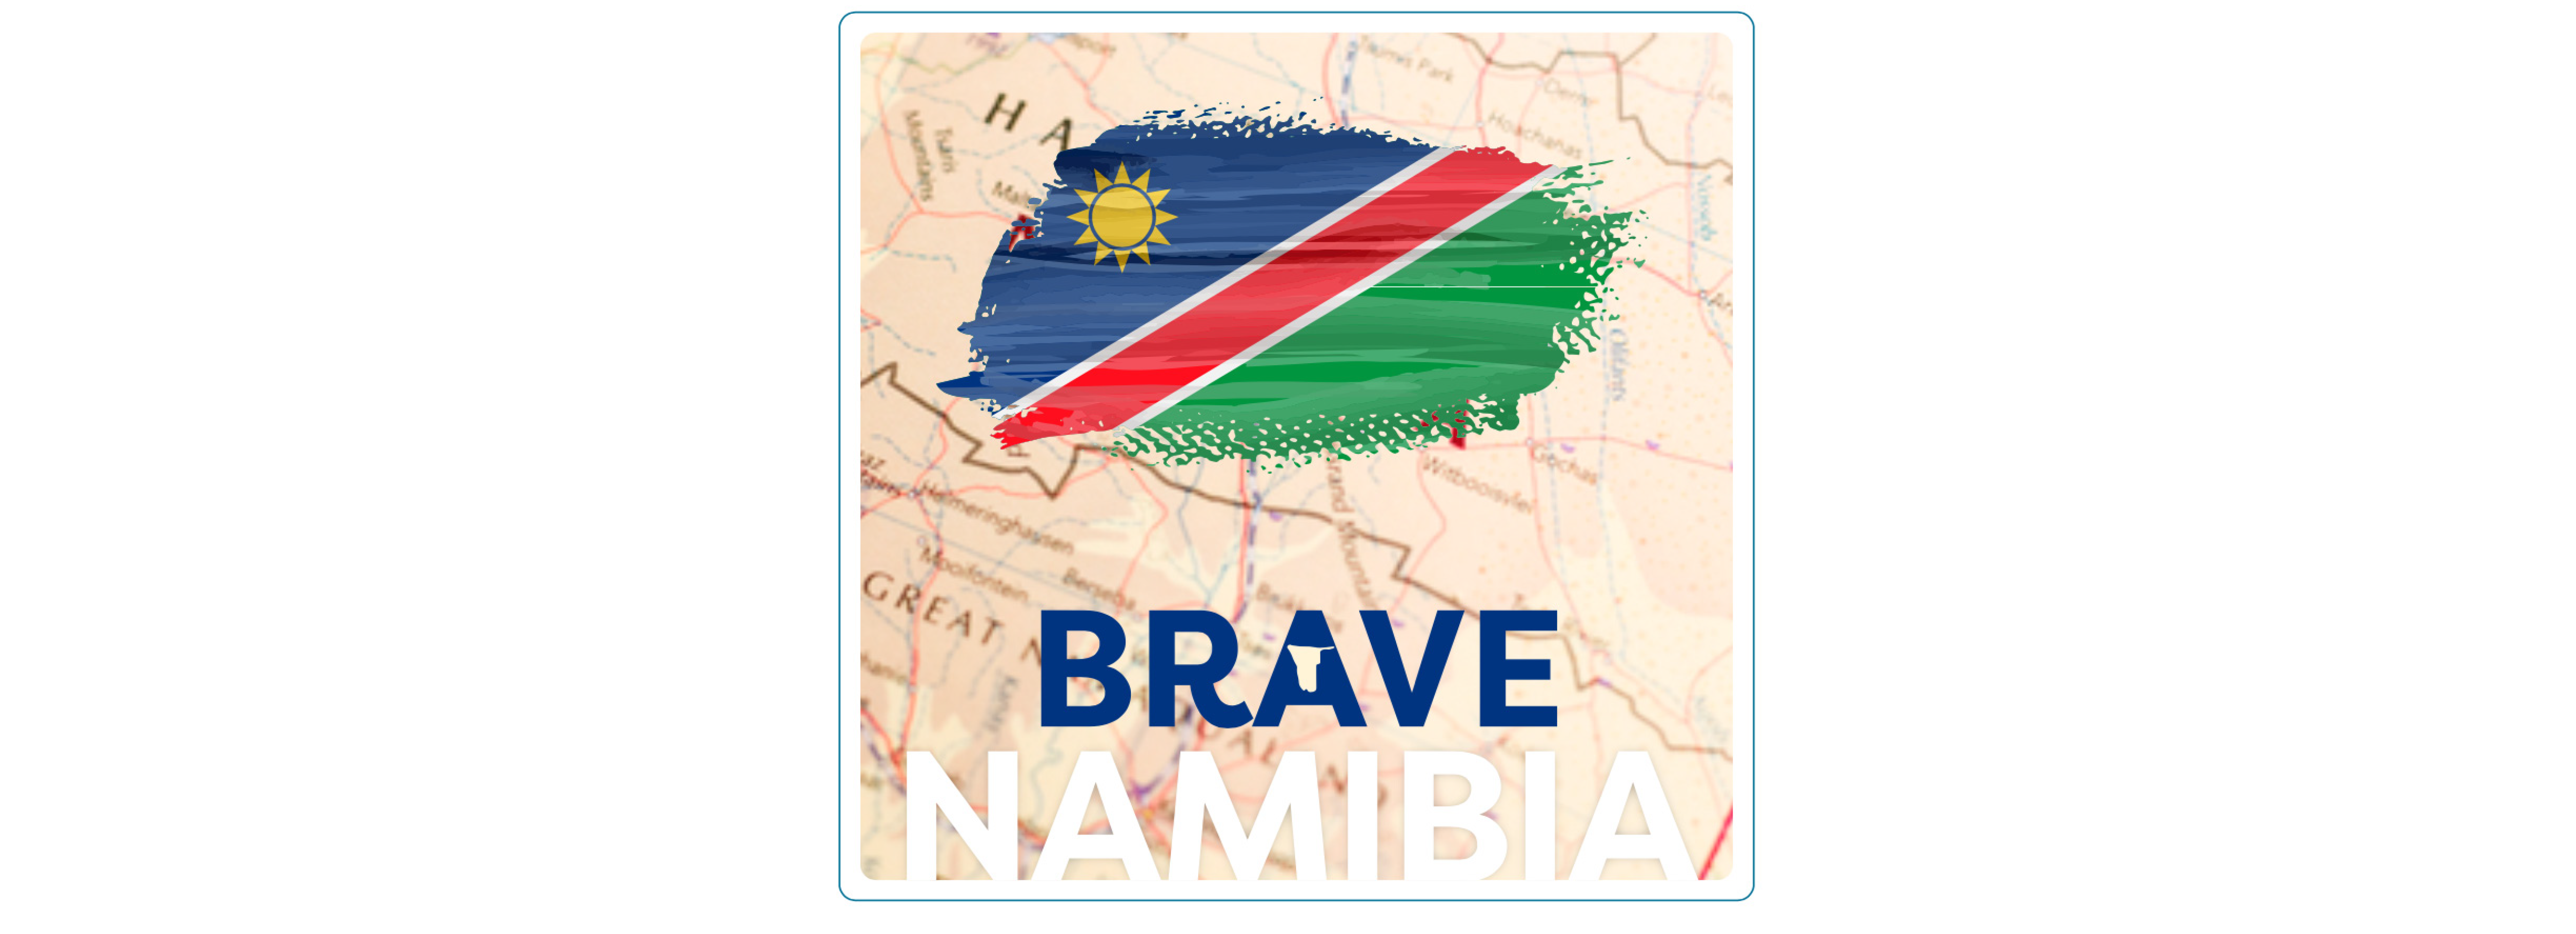 Brave Namibia - 16 March 2022